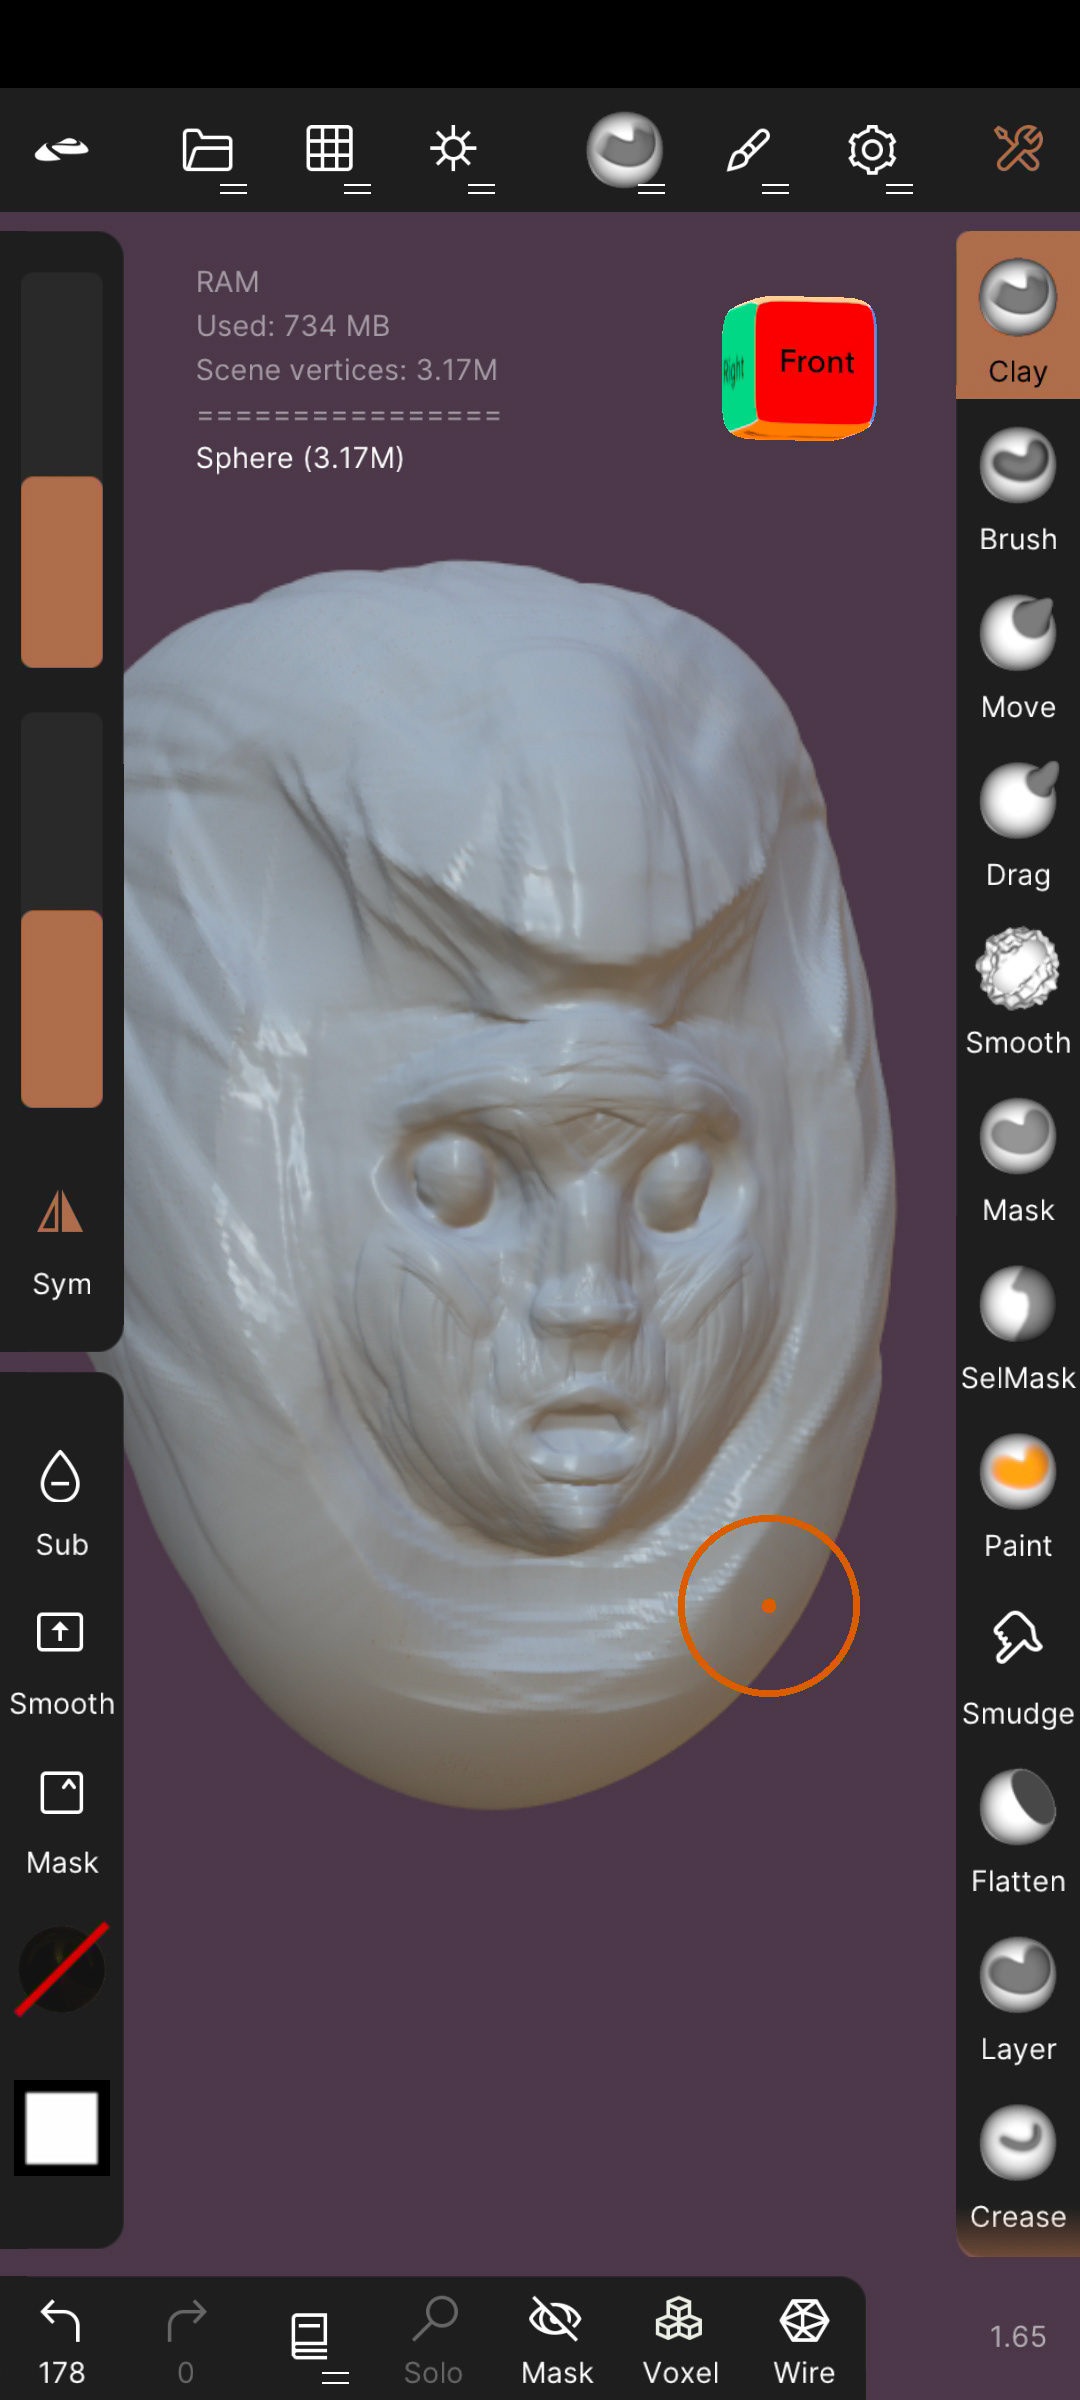 Mobile app music nomad sculpting  The Prodigy train art XL recordings Zbrush